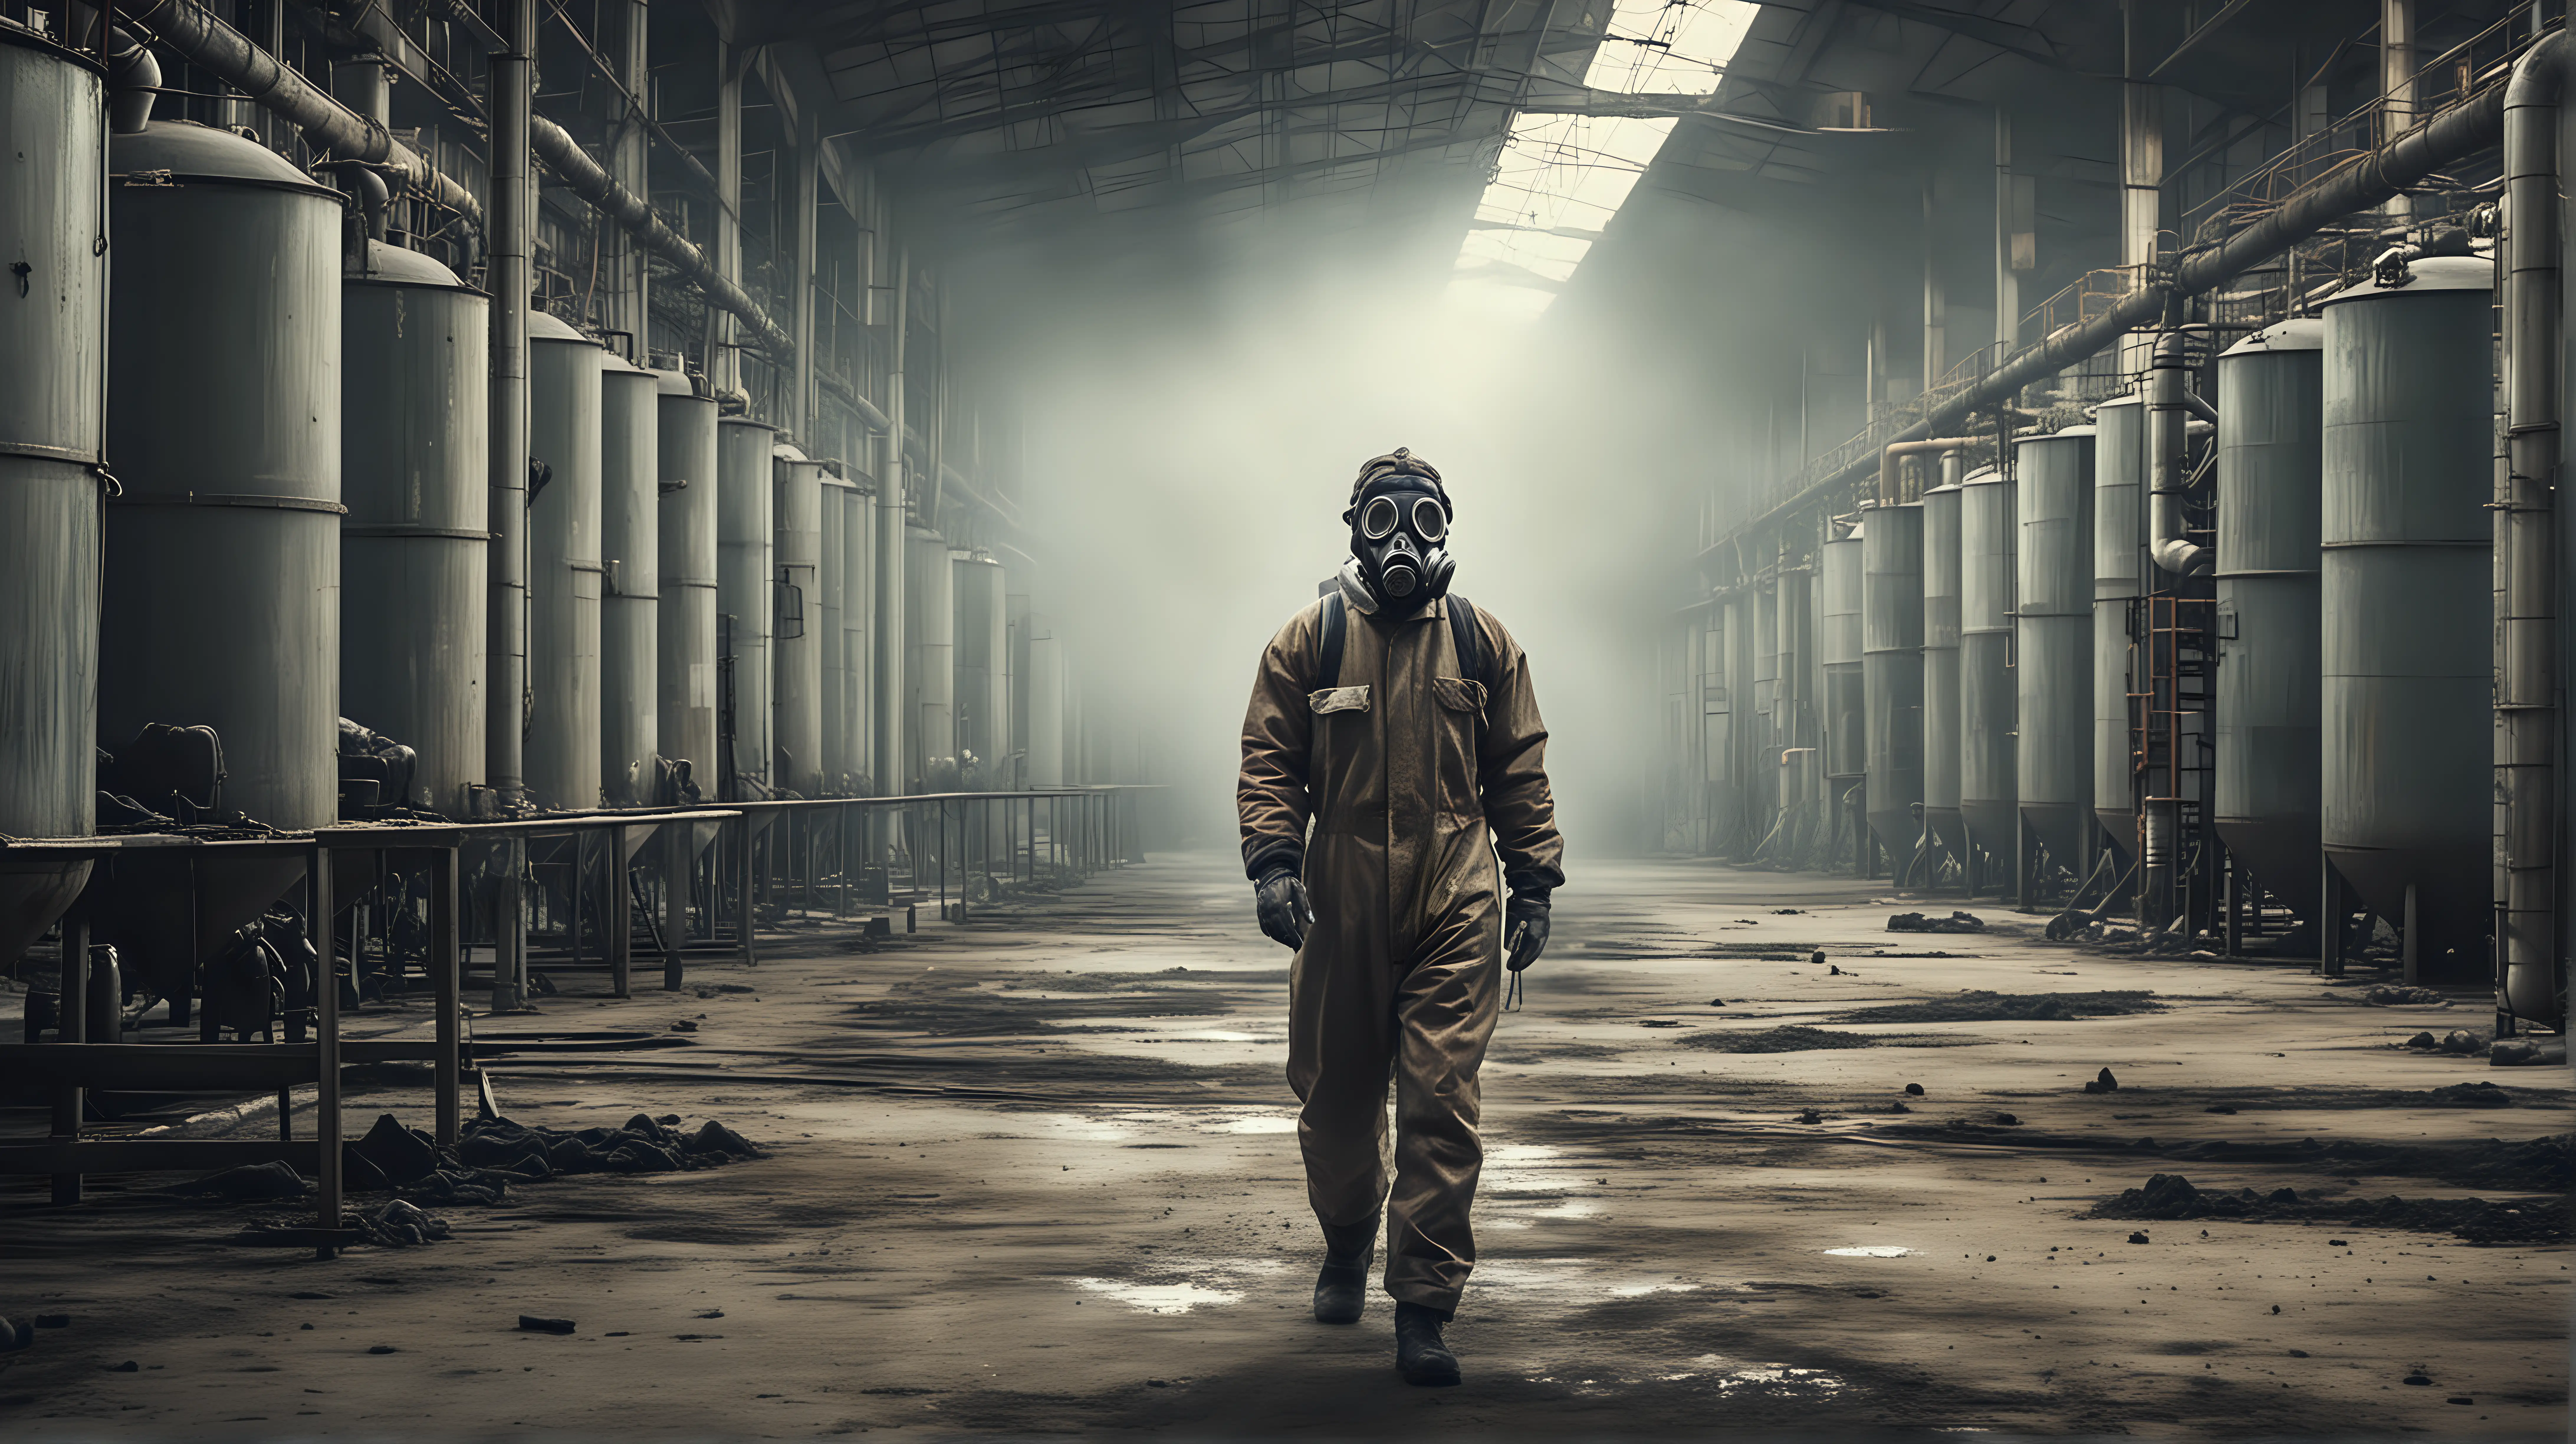 Distant Worker Decontaminating in Large Factory with Gas Mask Grunge Industrial Scene